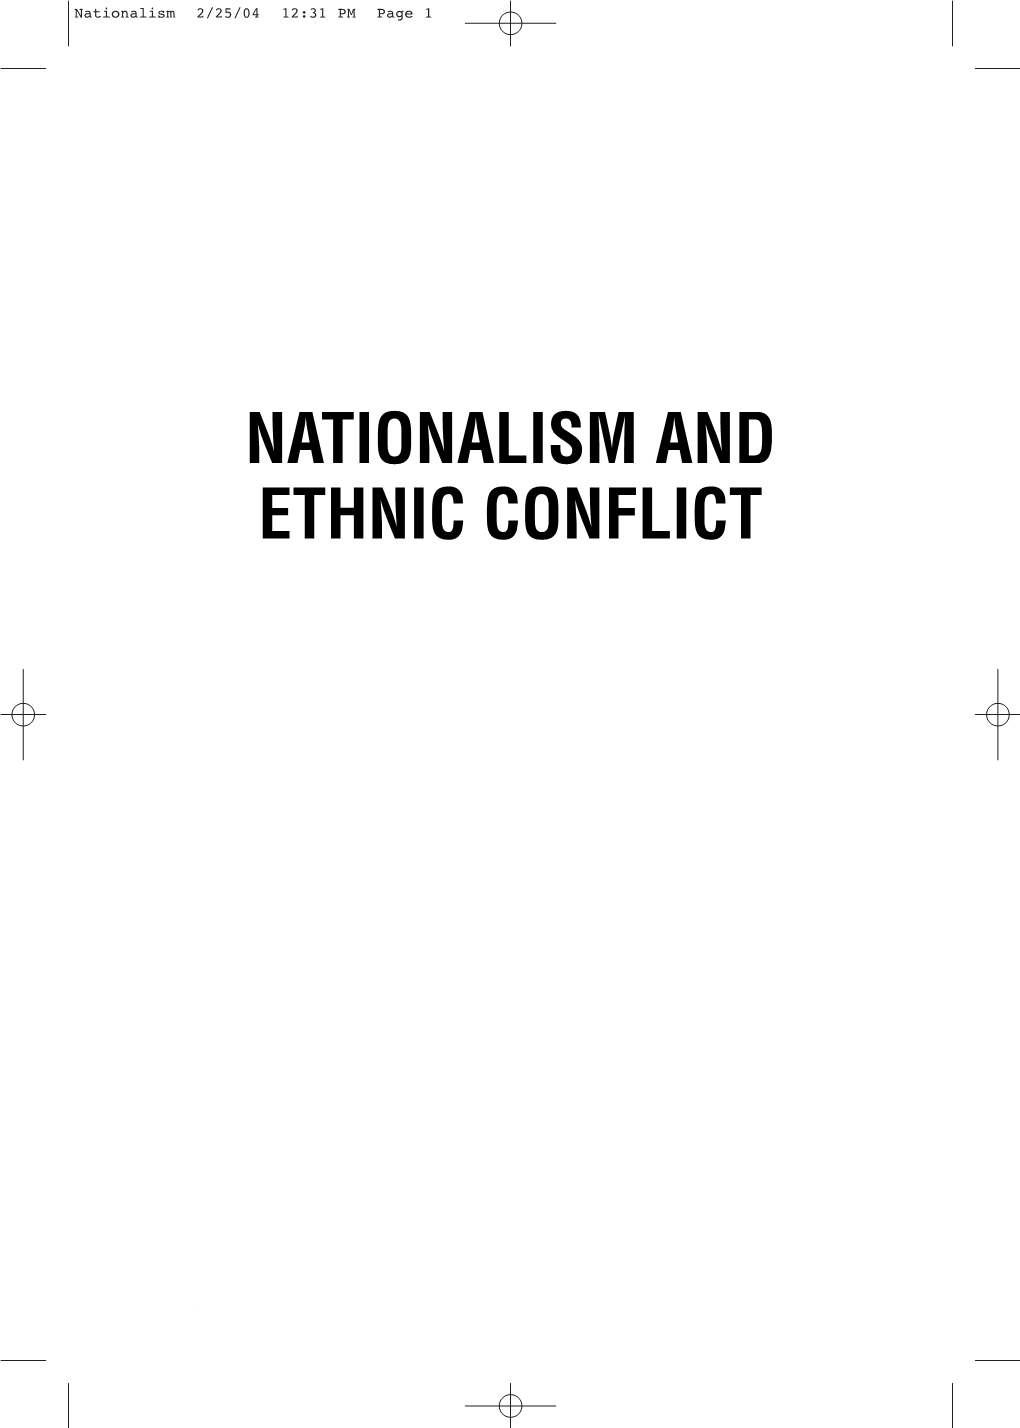 NATIONALISM and ETHNIC CONFLICT Nationalism 2/25/04 12:31 PM Page 2 Nationalism 2/25/04 12:31 PM Page 3